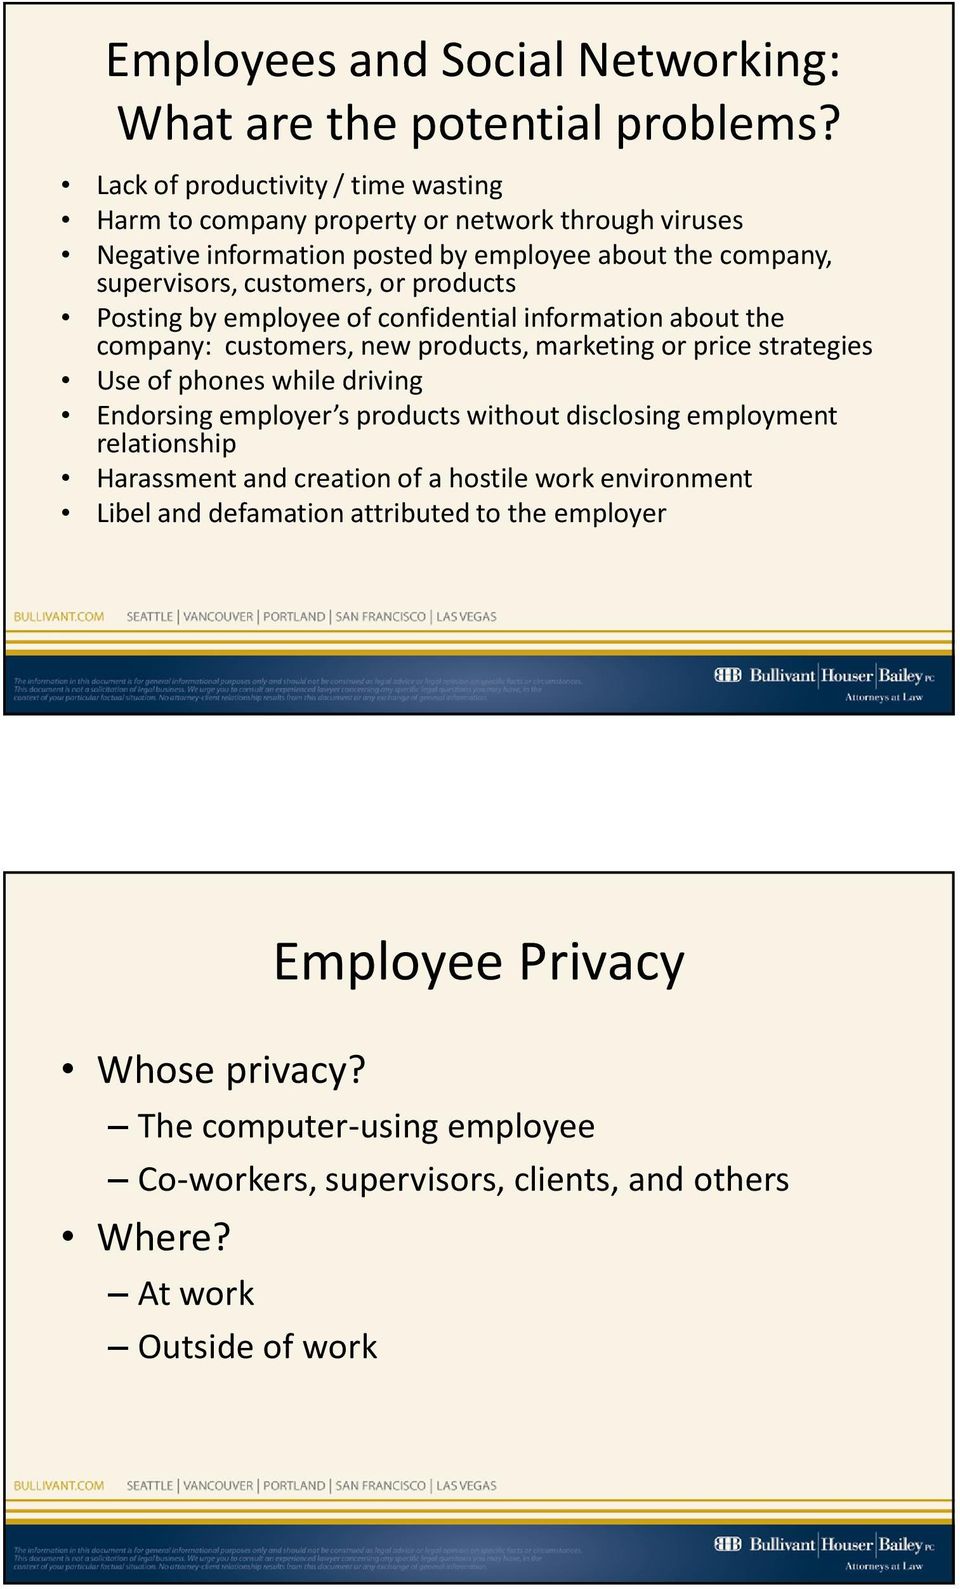 products Posting by employee of confidential information about the company: customers, new products, marketing or price strategies Use of phones while driving Endorsing employer